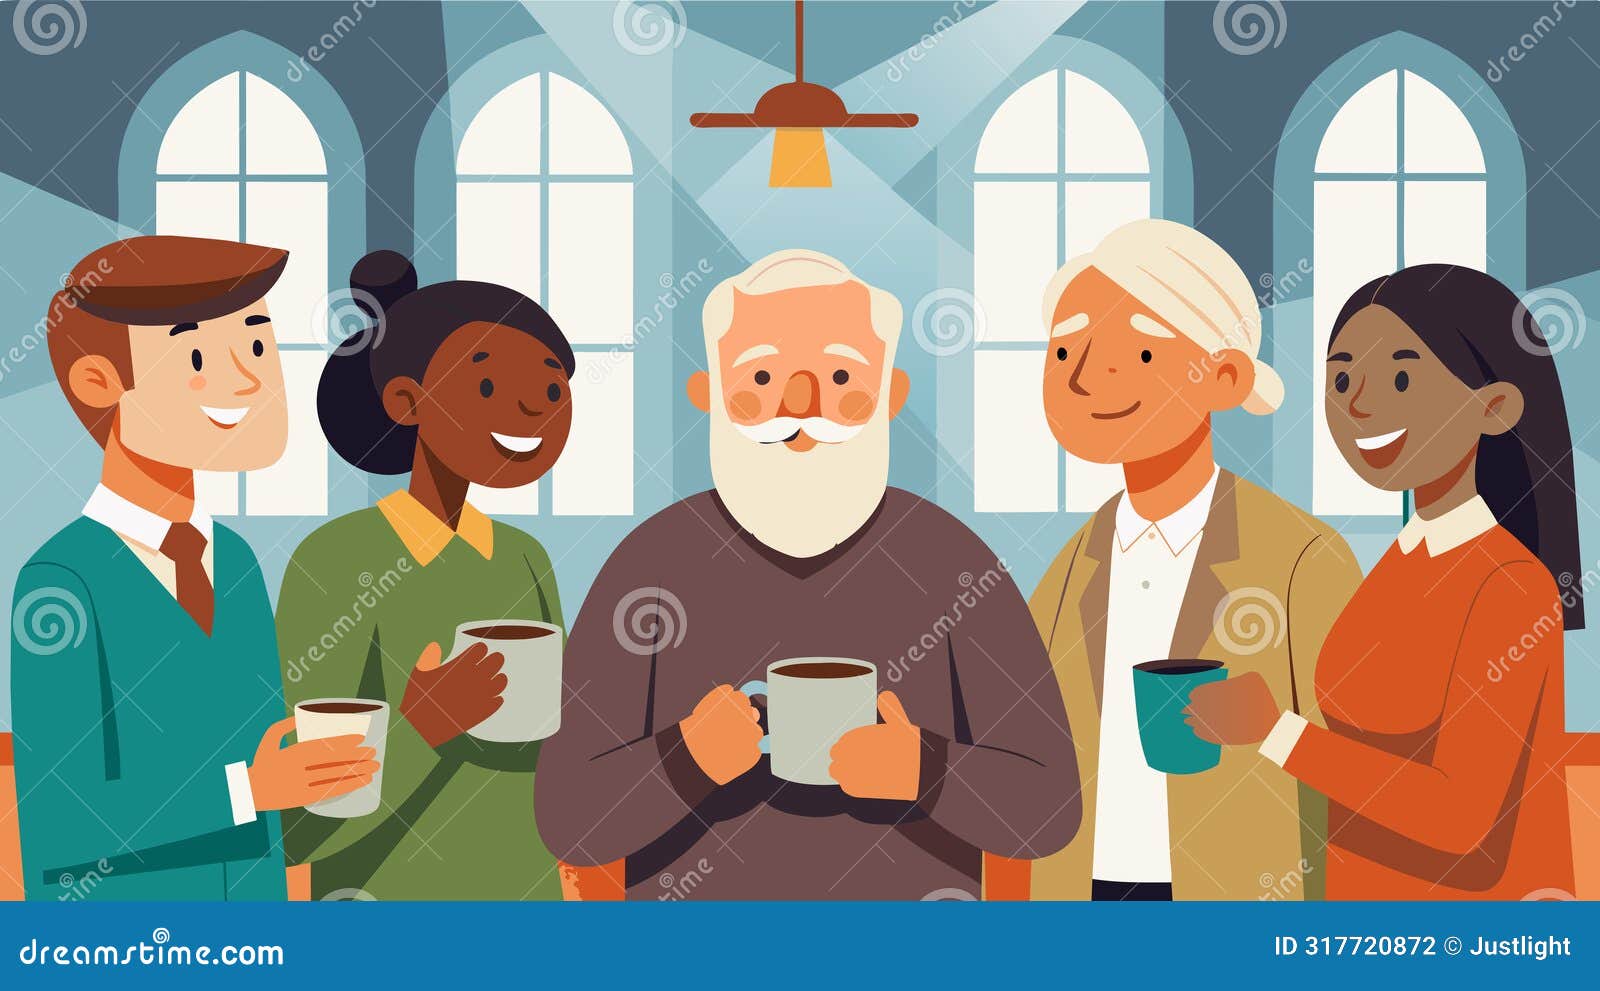 in the church fellowship hall the chatter of happy voices and the rich scent of coffee fills the air as longtime members